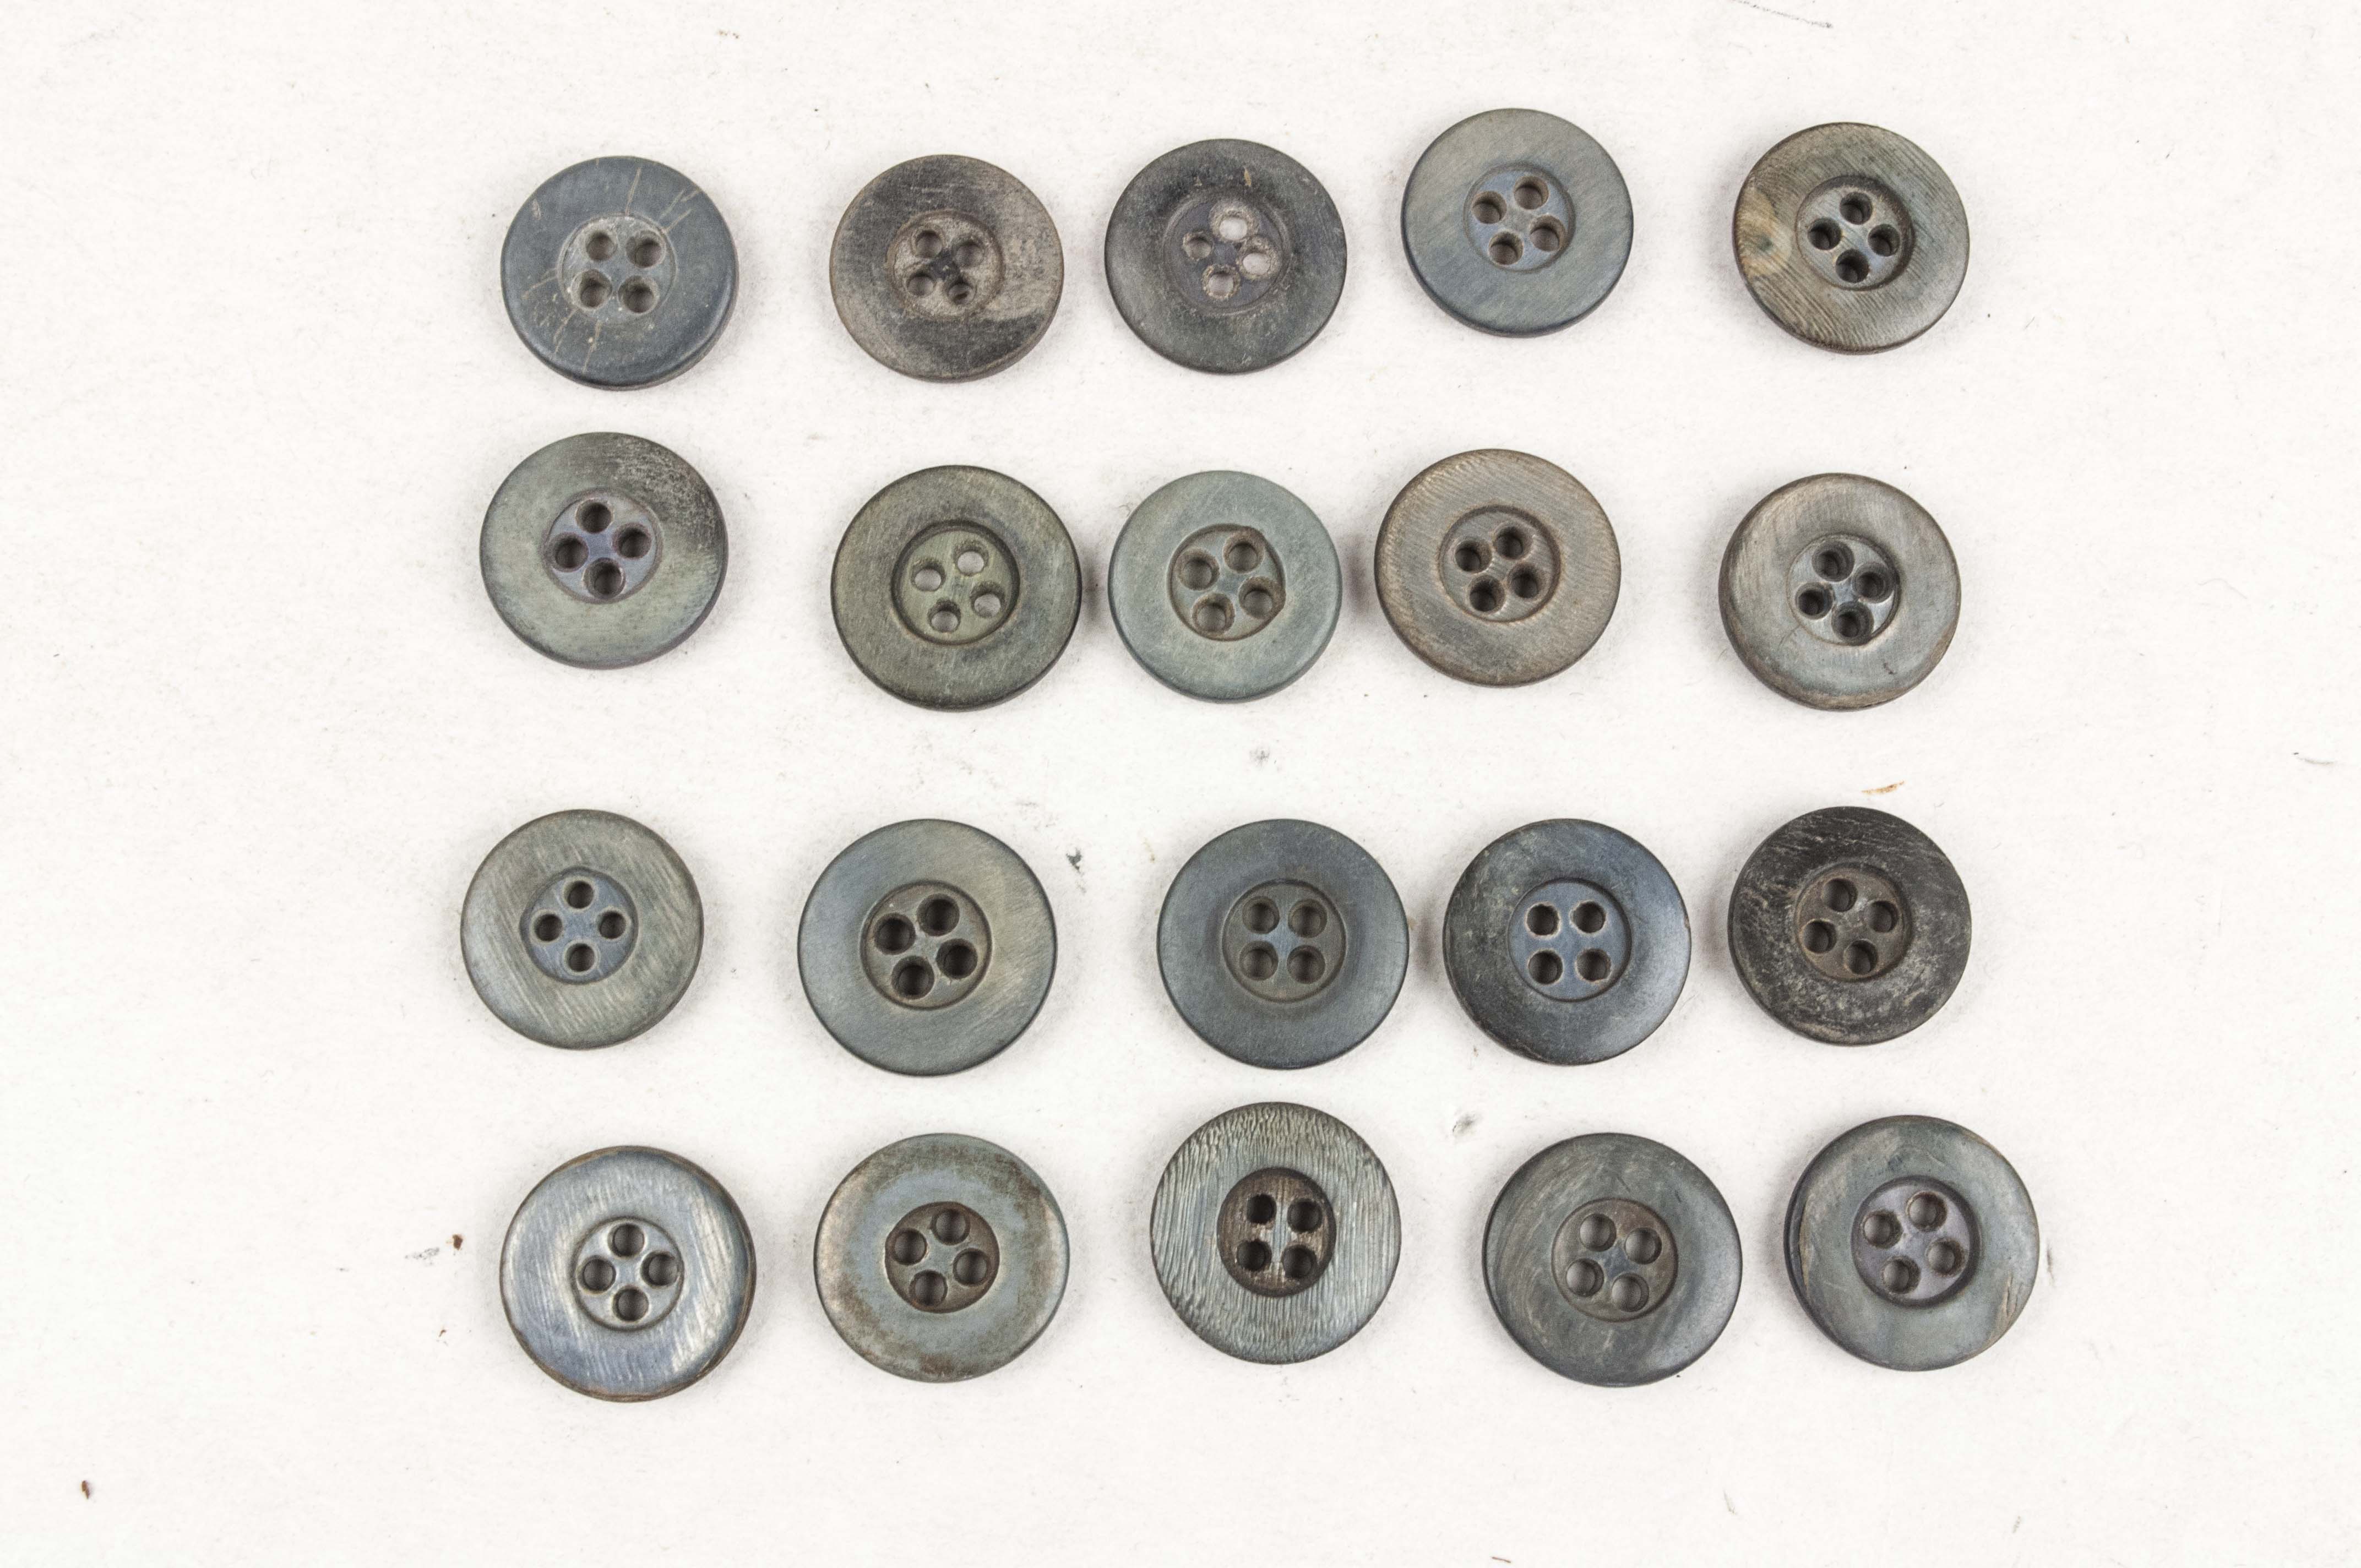 20 original early war buttons for tunics and trousers – fjm44